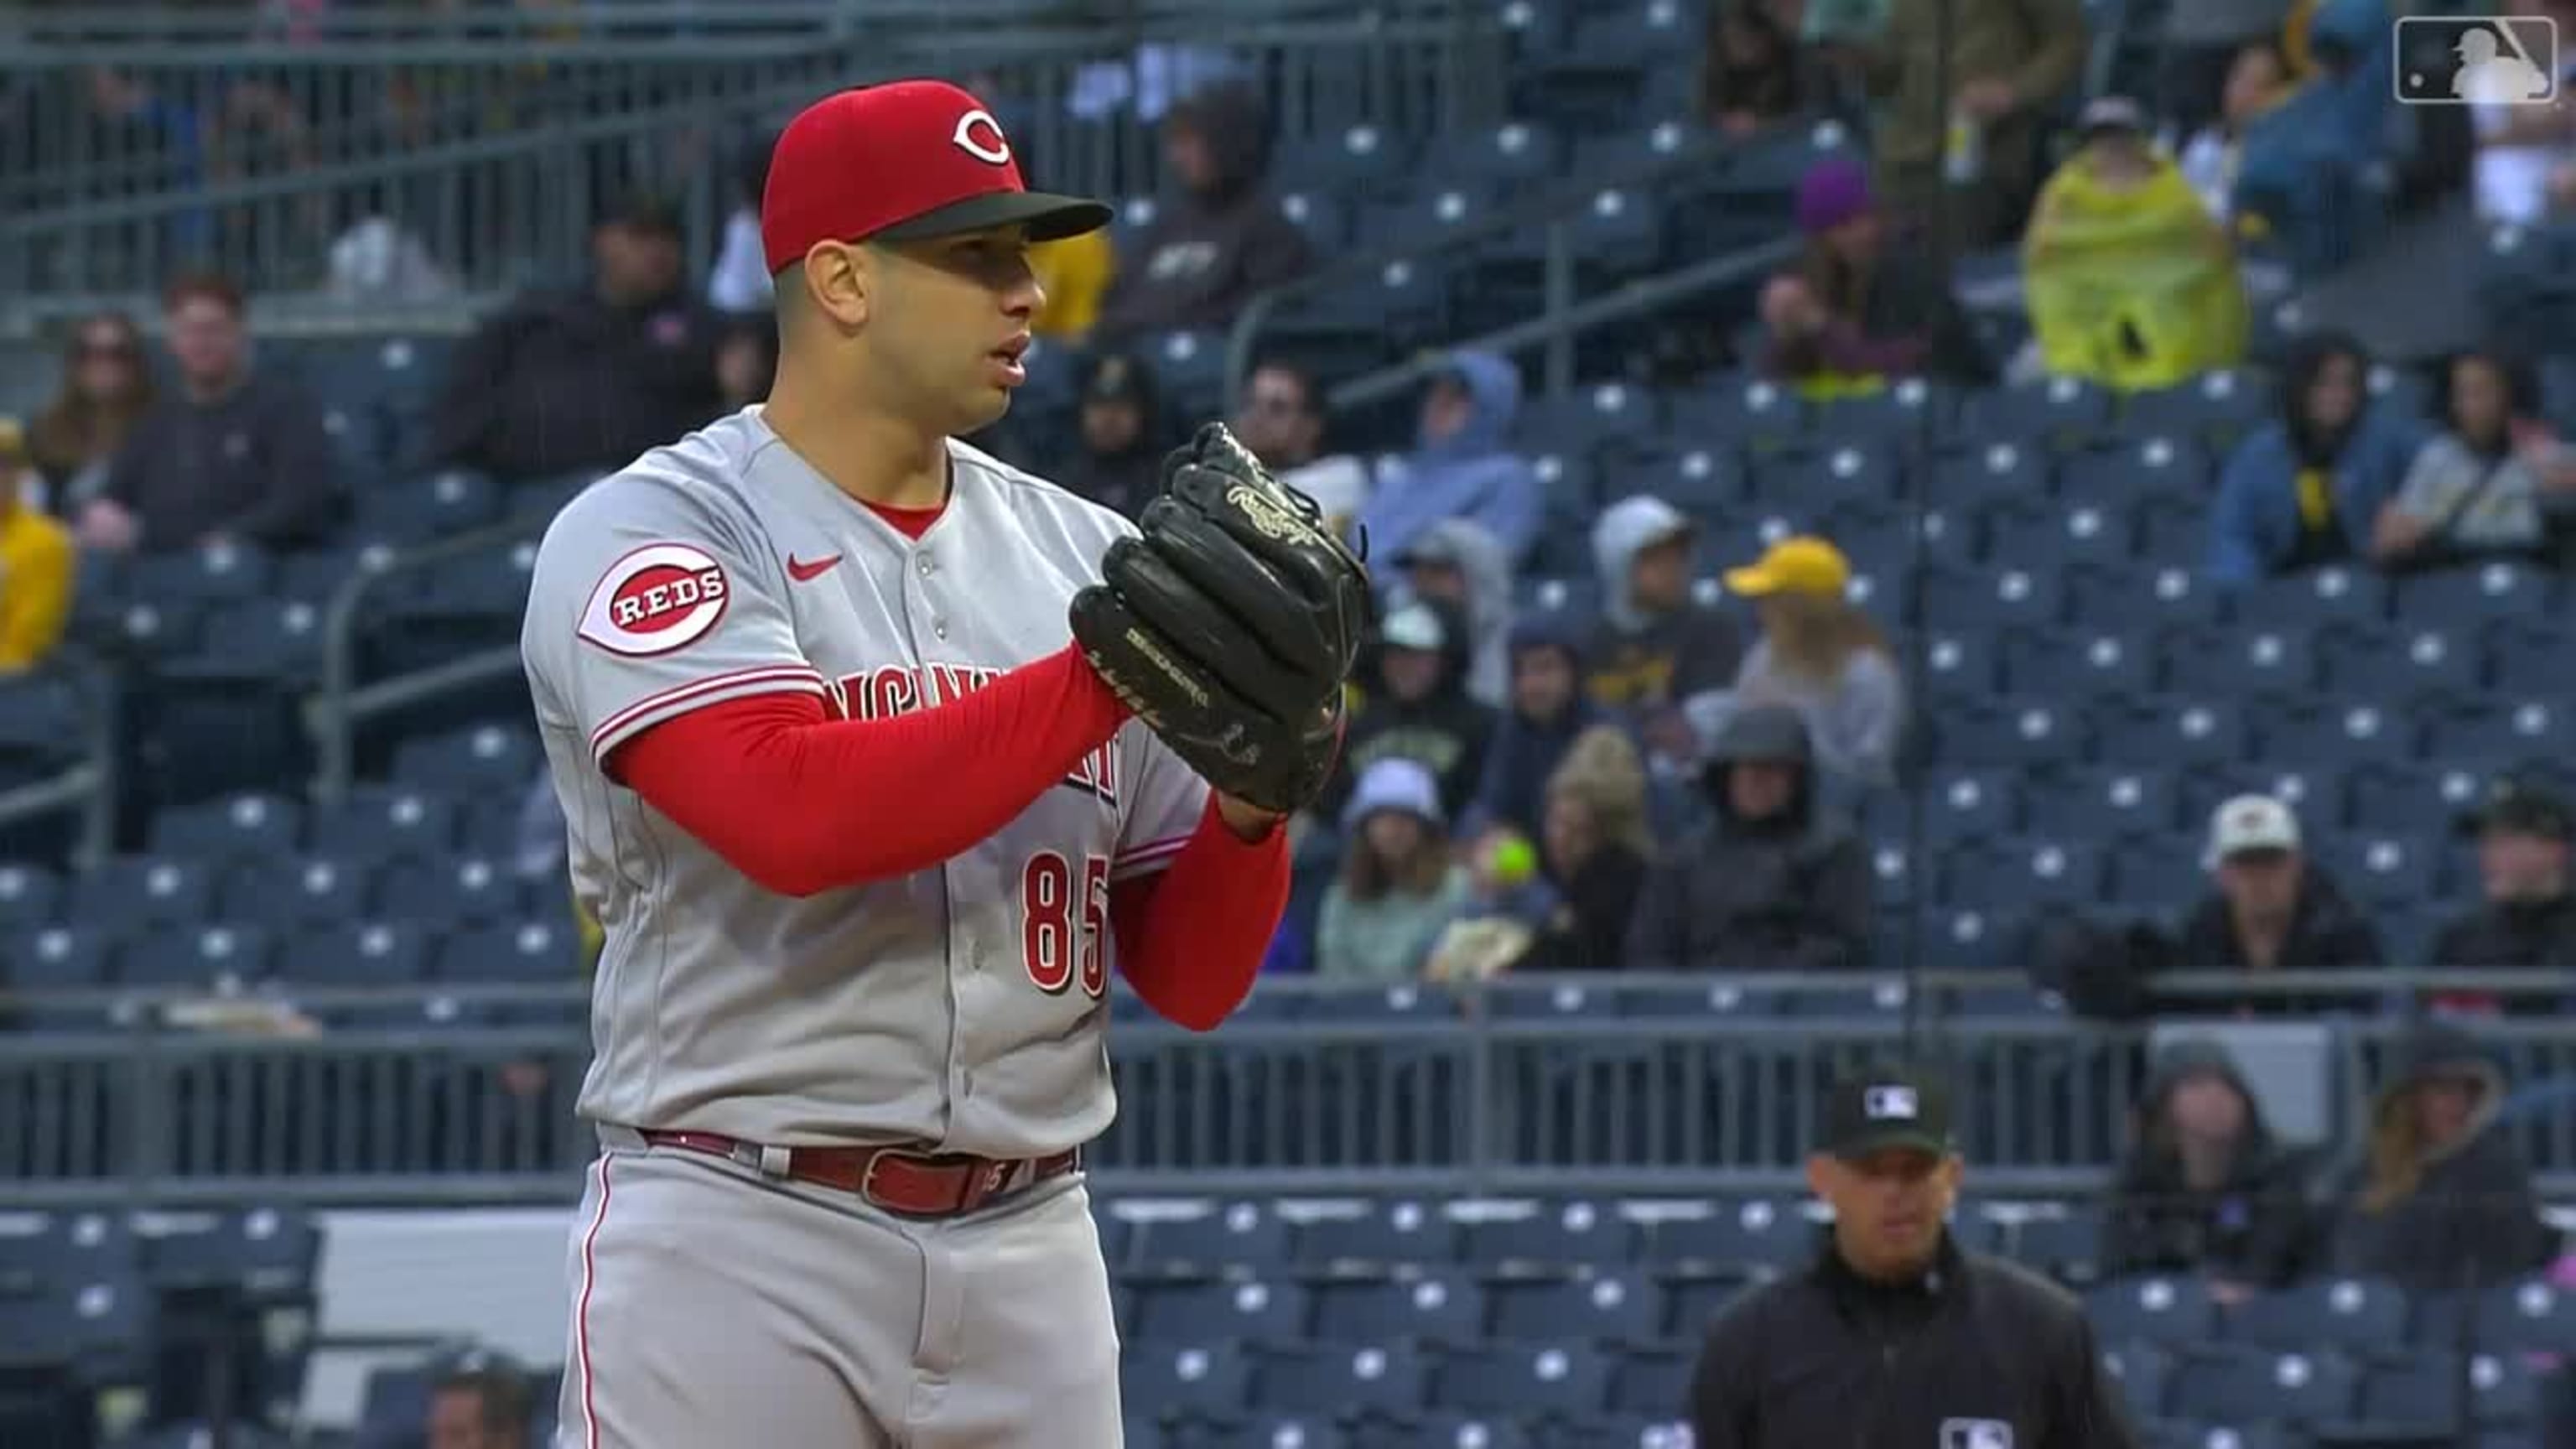 Reds offense struggles in loss to Pirates